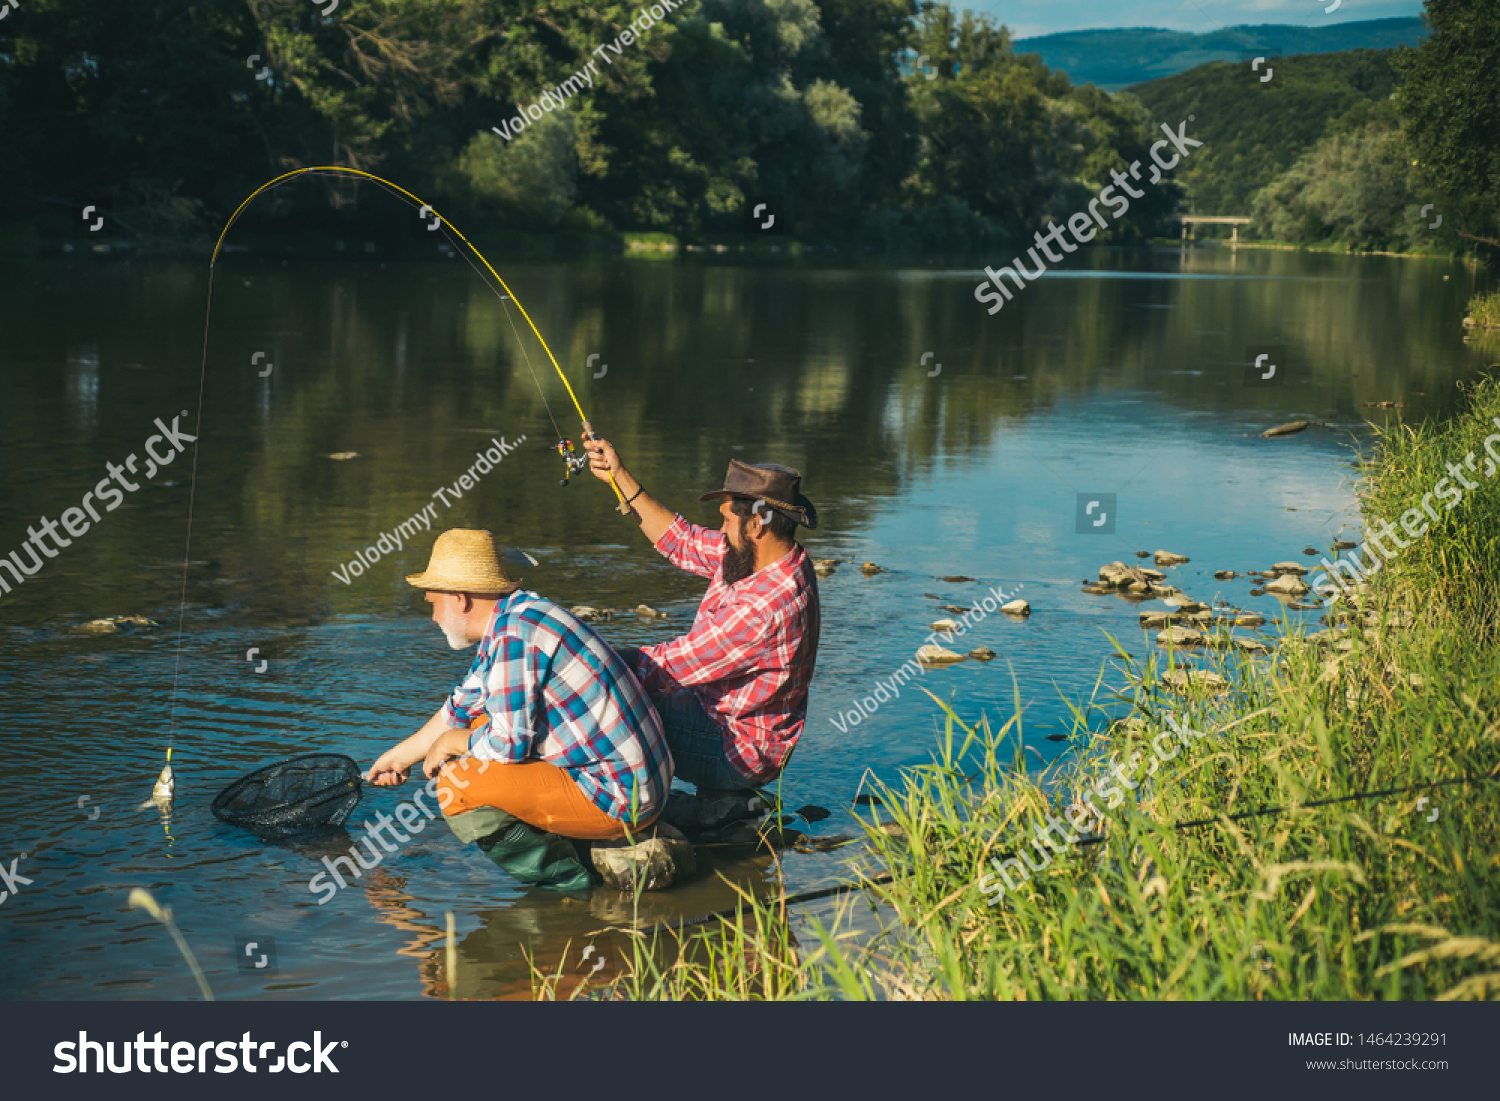 Man fisherman catches a fish. Fly fishing is most renowned as a method for catching trout grayling and salmon #1464239291